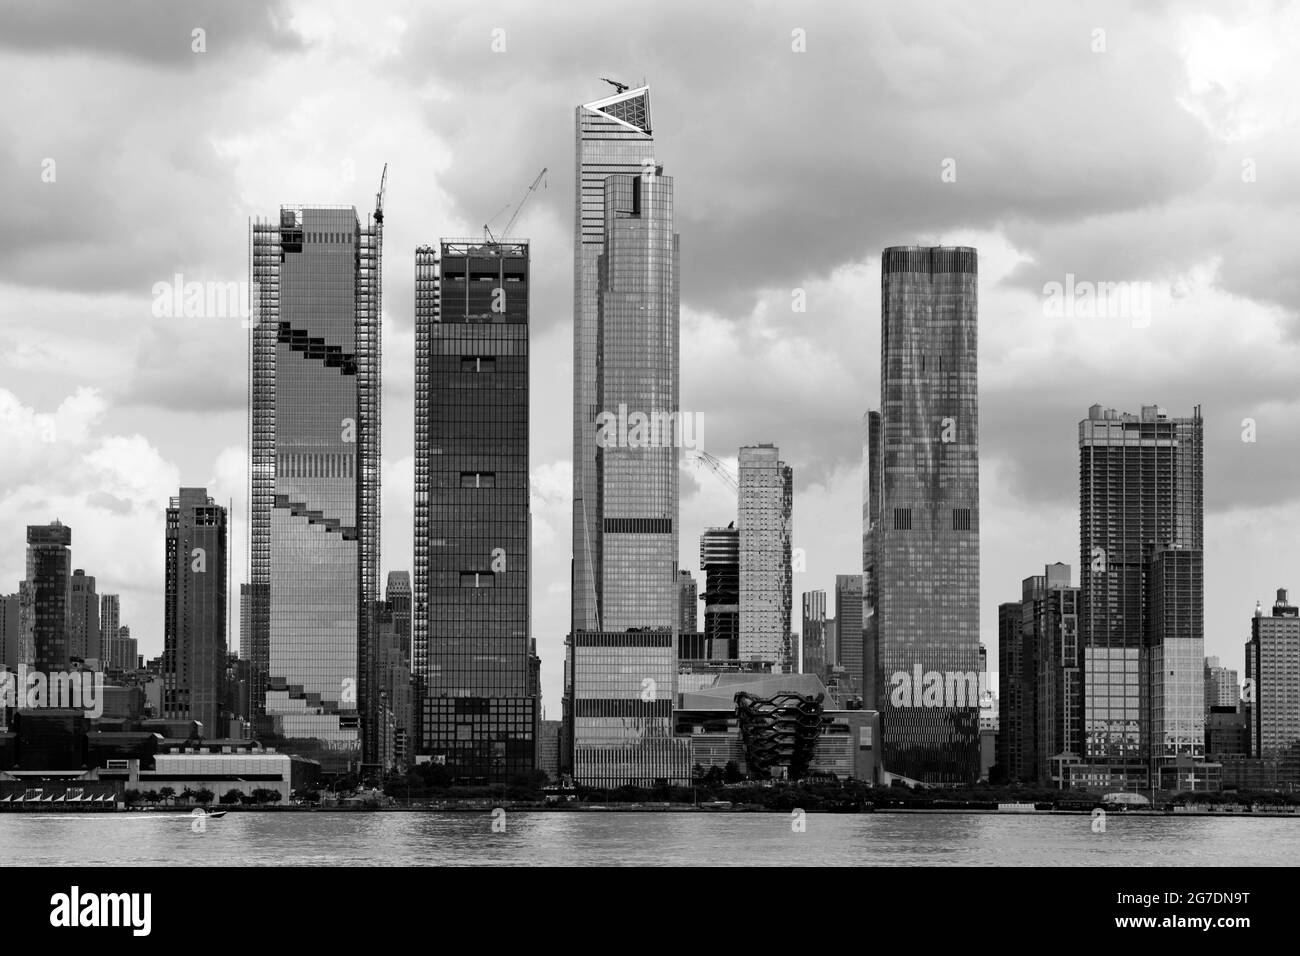 The West Side of Midtown Manhattan, New York City. The Hudson Yards complex is prominently visible. Stock Photo